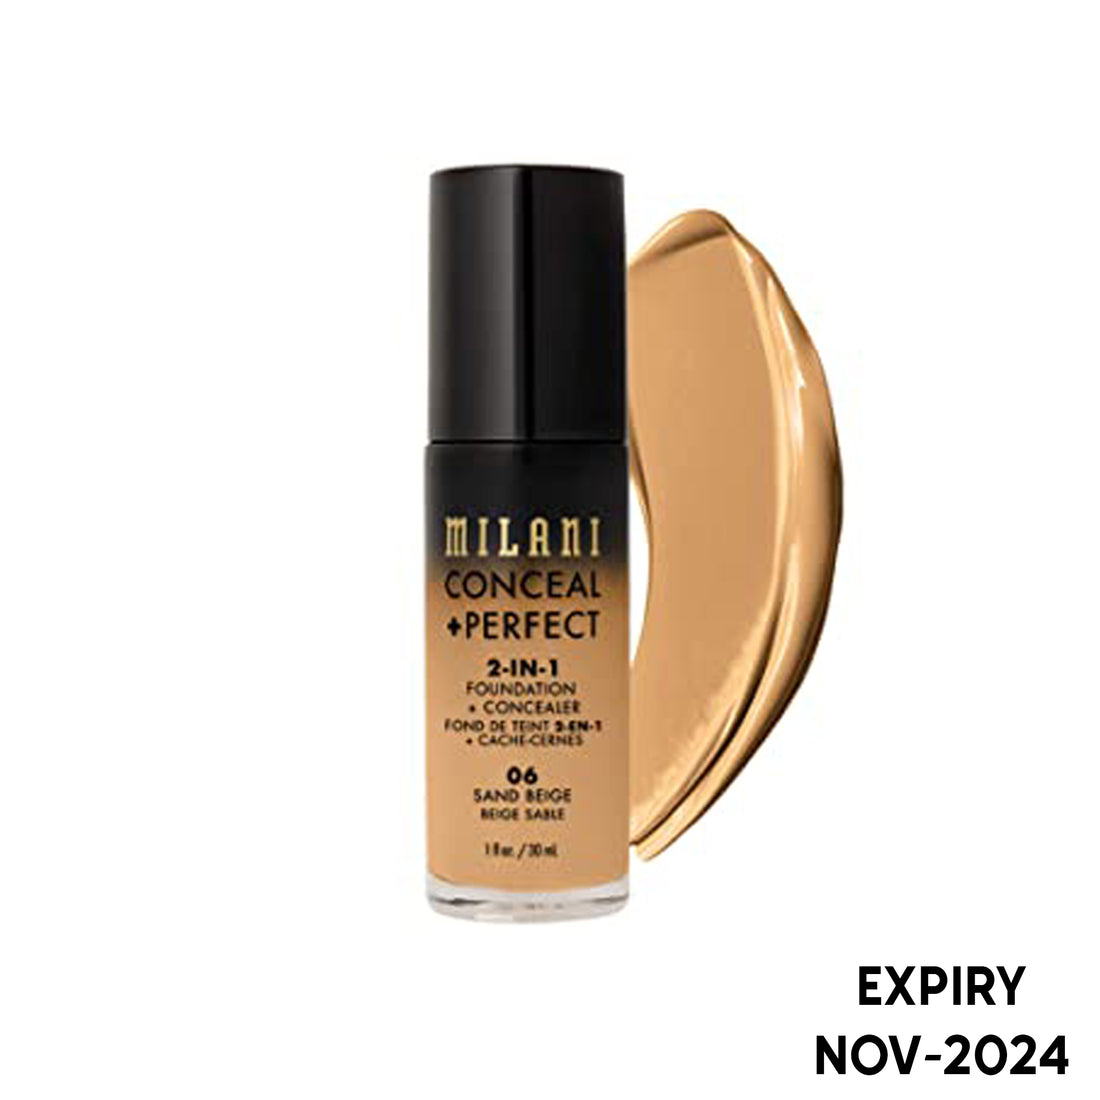 Milani Conceal + Perfect 2-in-1 Foundation and Concealer (30ml) - Sand Beige